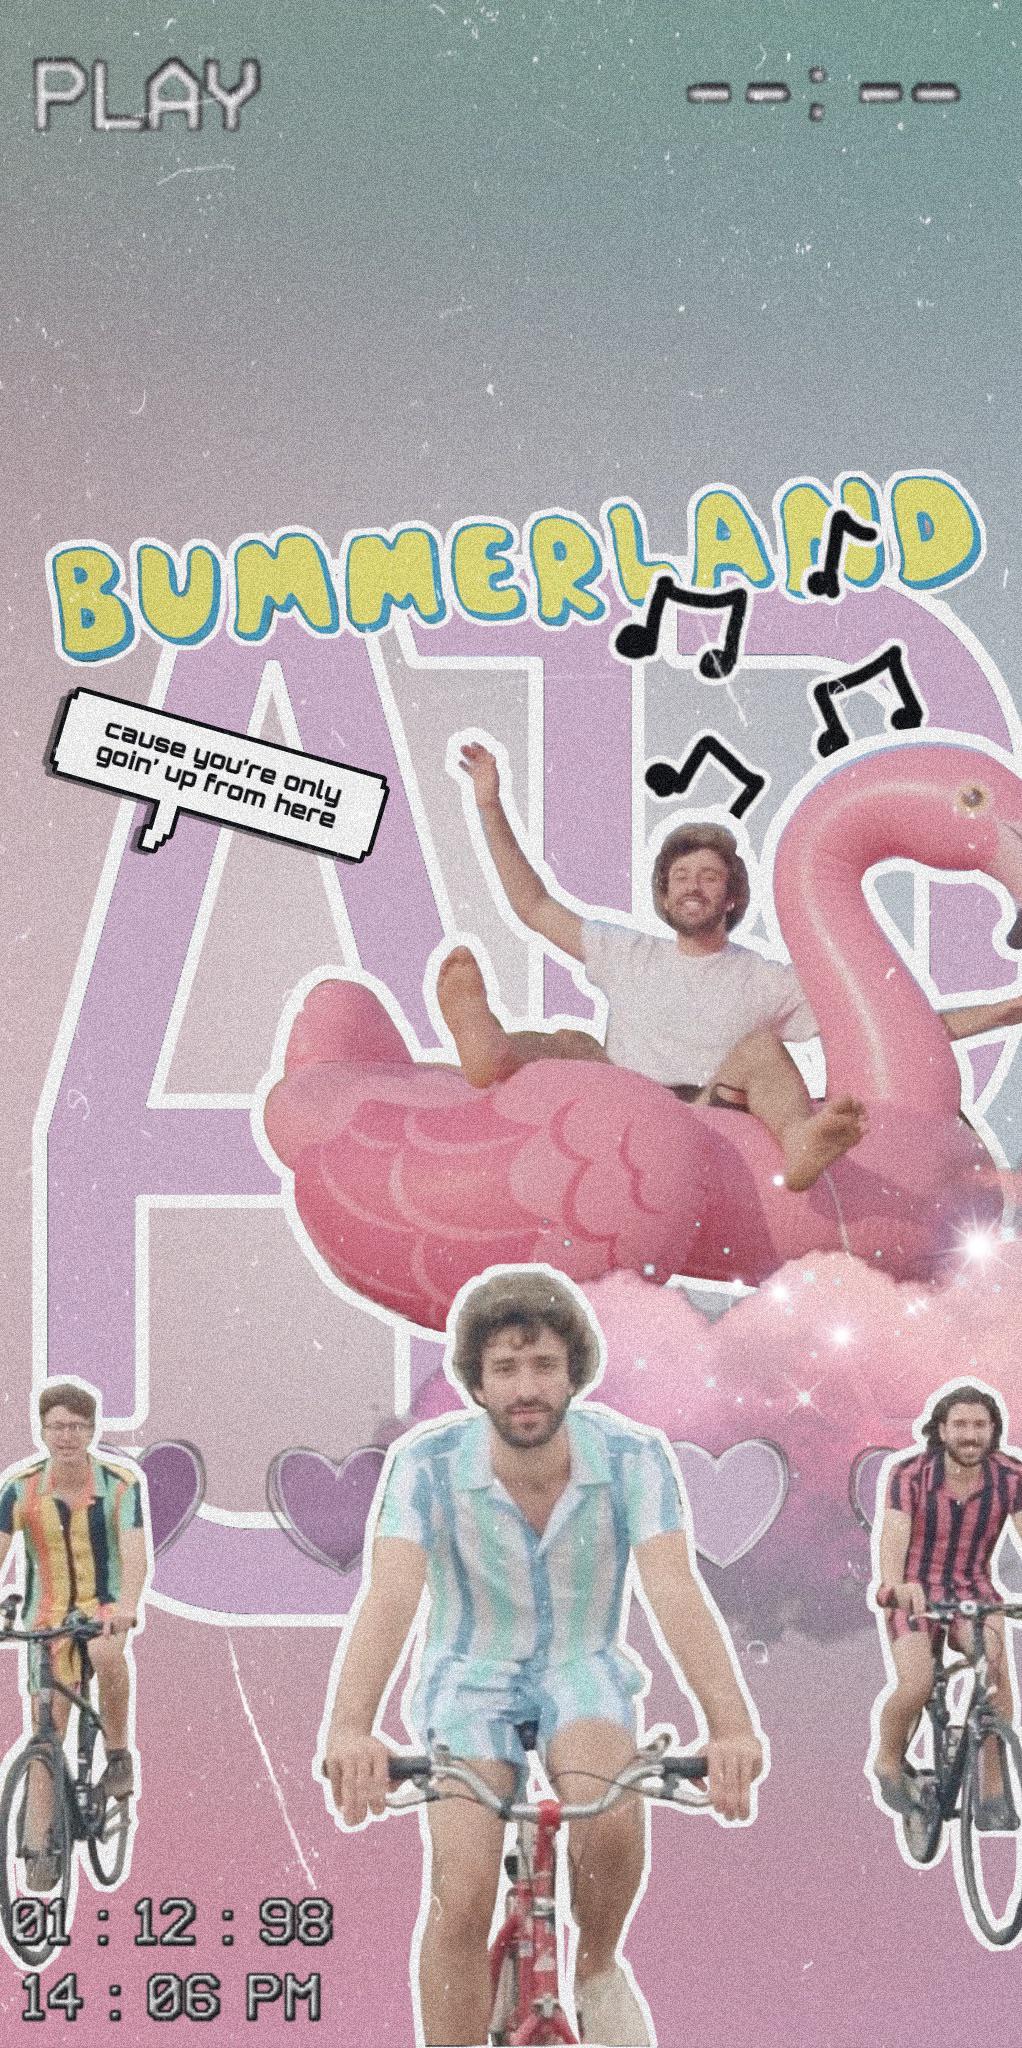 i made bummerland into an aesthetic phone wallpaper (or tried to at least): AJR